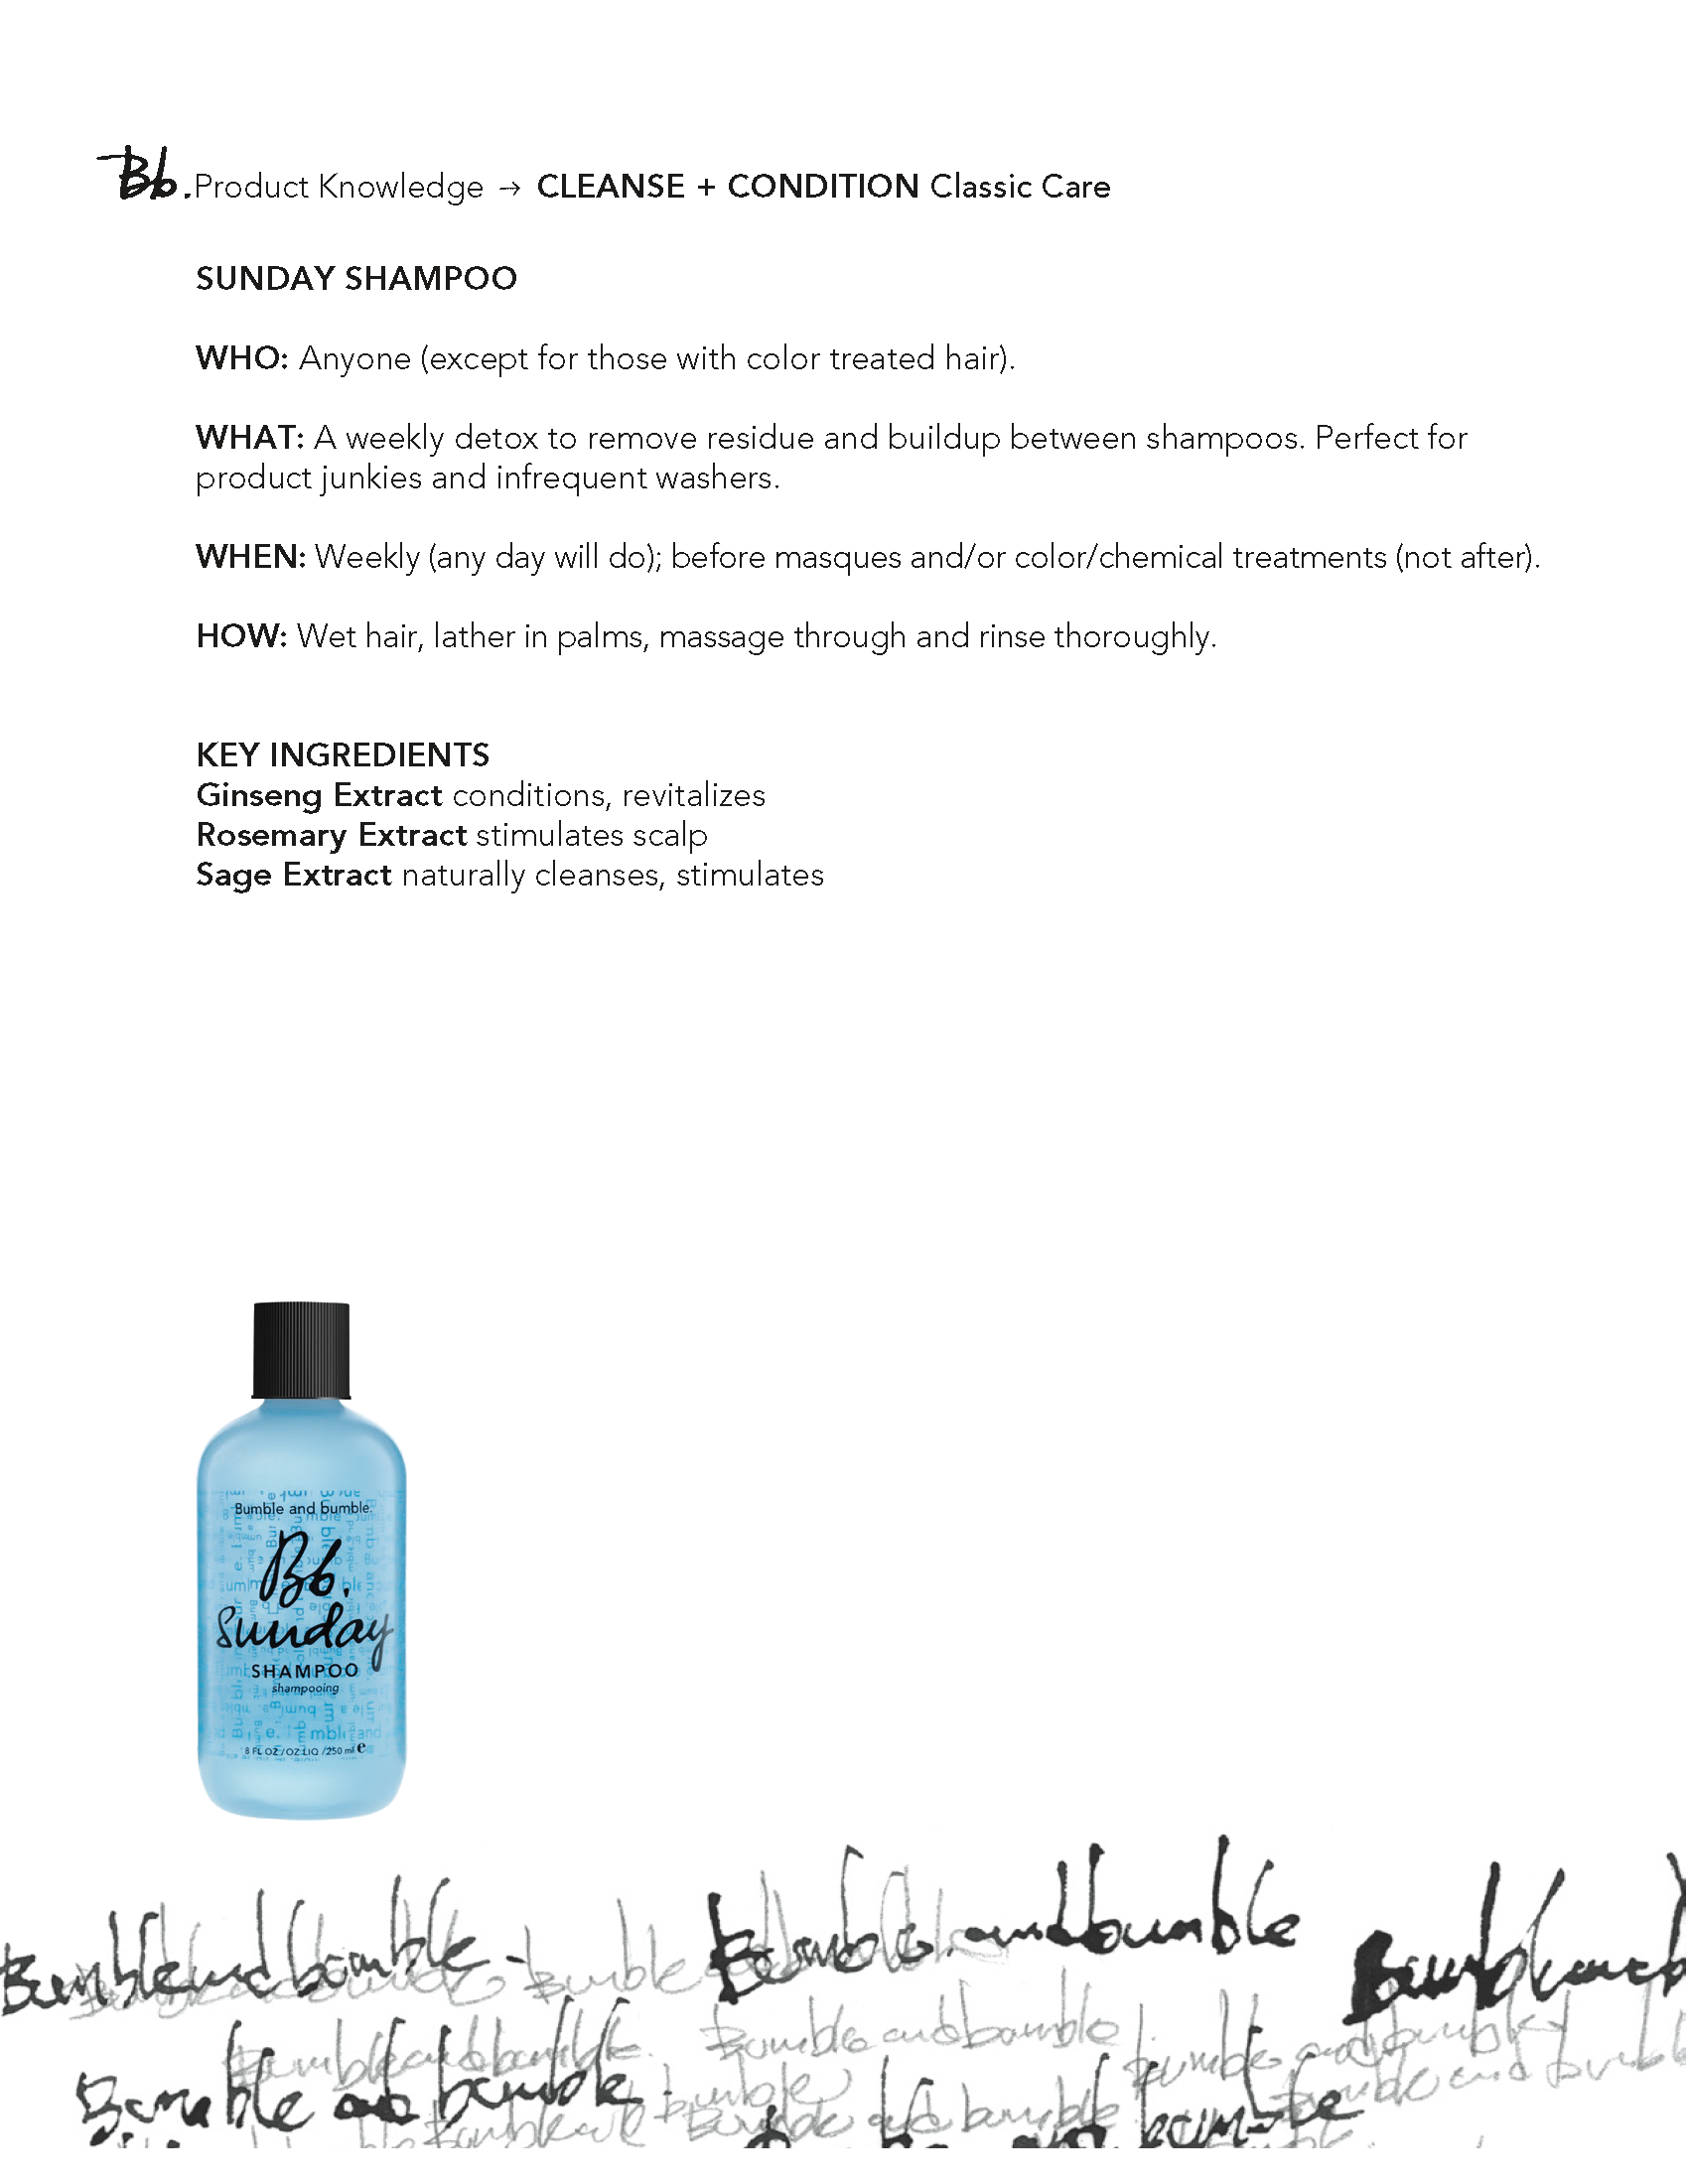 2021 Bumble Collections PK Notes for Salons - FULL LINE - Blonde + Ultra + Curl (1)_Page_63.png